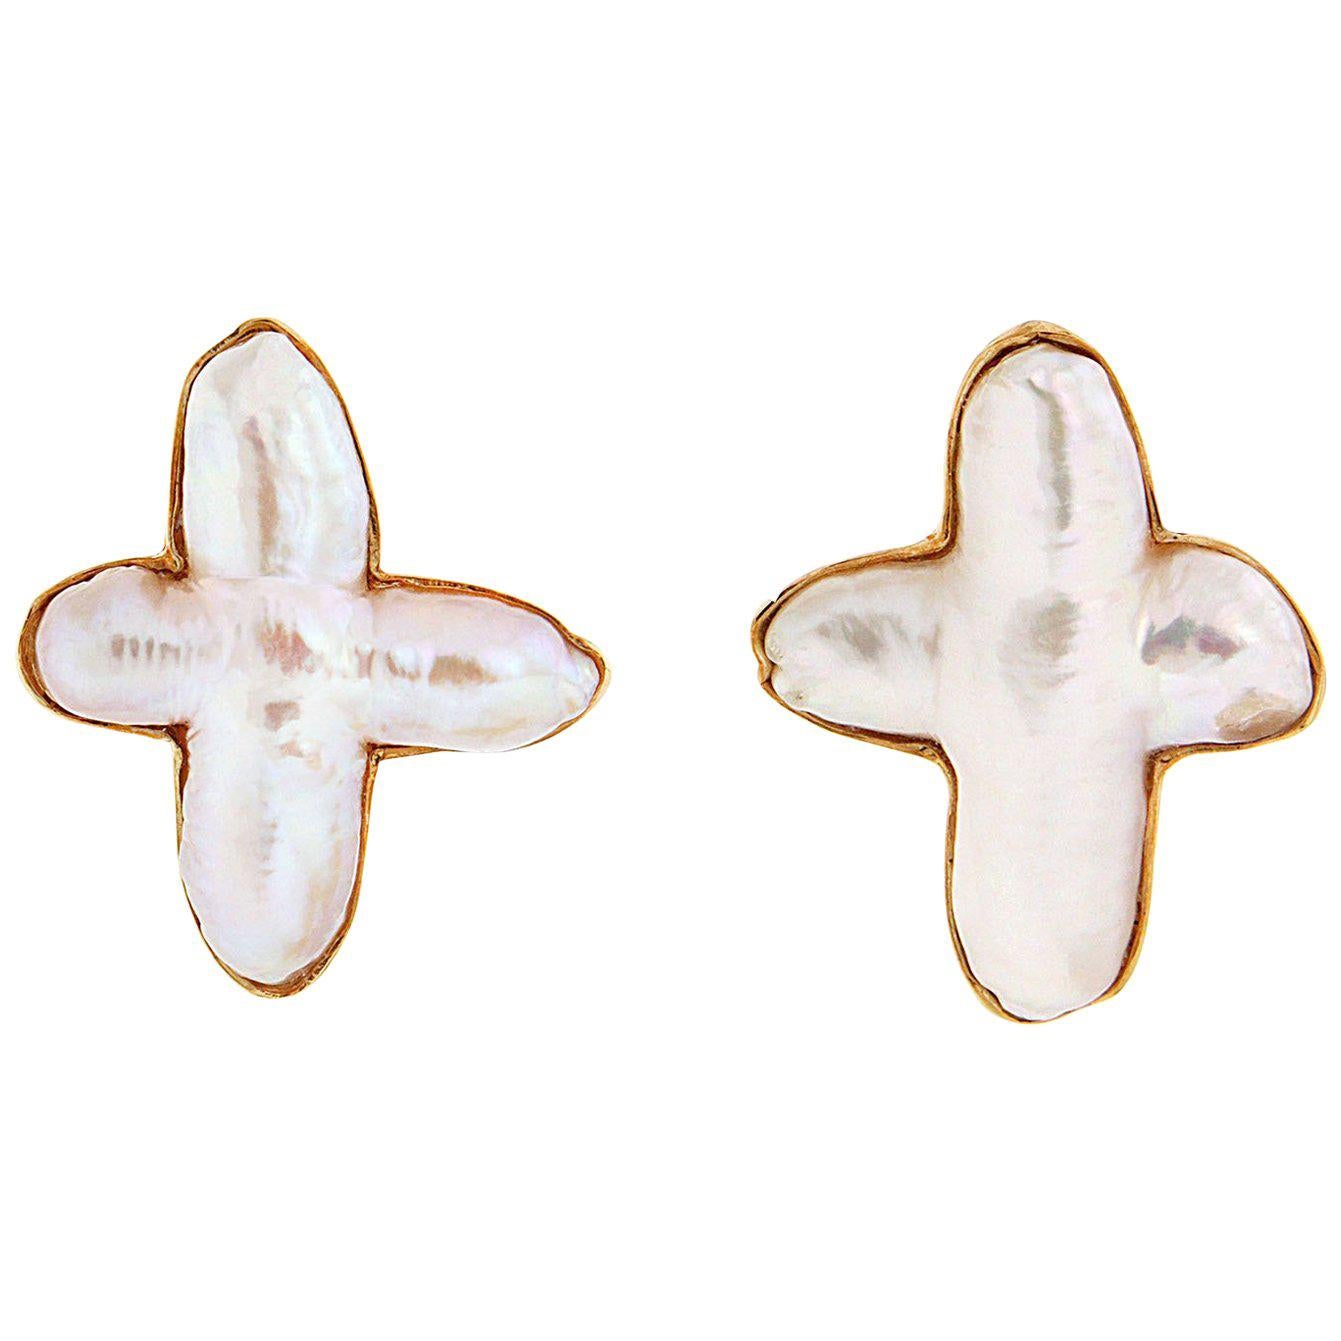 Valentin Magro Baroque Cultured South Sea Pearl Gold Cross Earrings